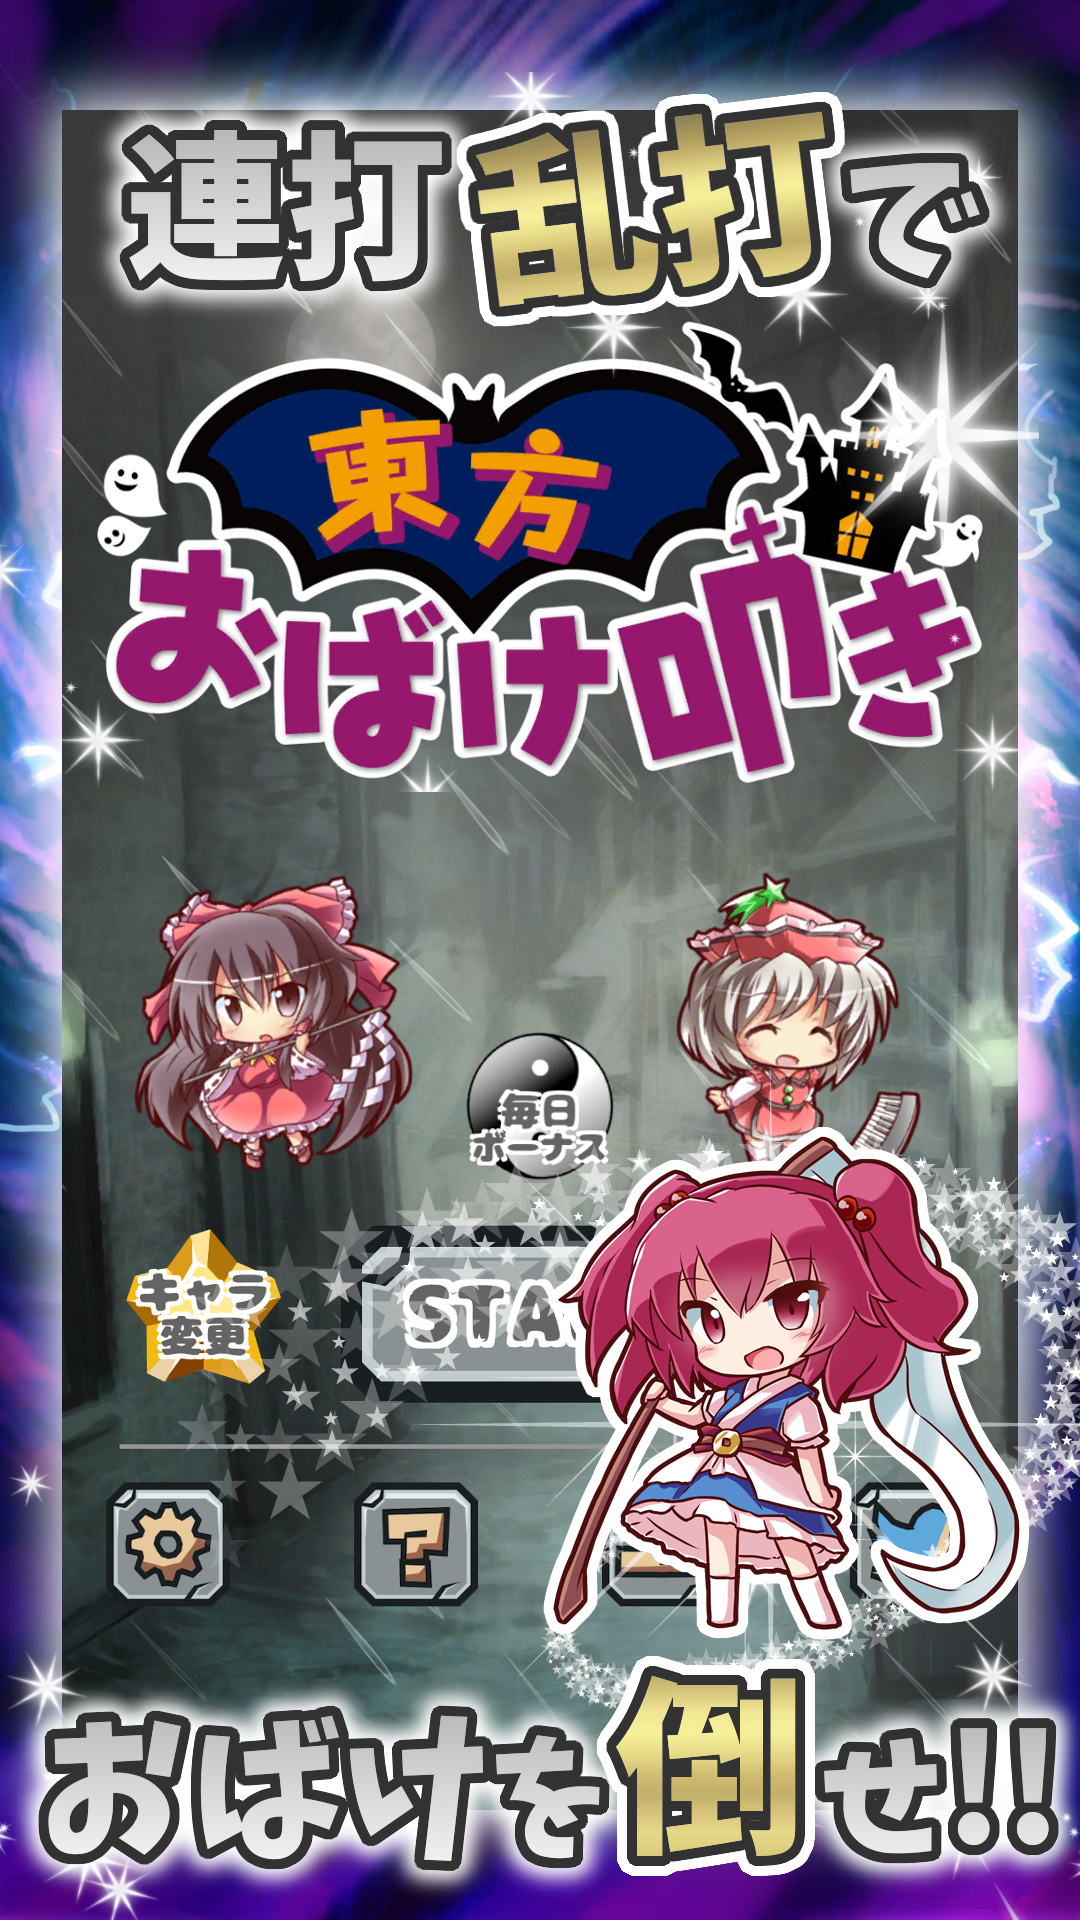 Screenshot 1 of Touhou Ghost Beating ~ Emocionante Treinamento Cerebral Number Touch ~ 2.0.3